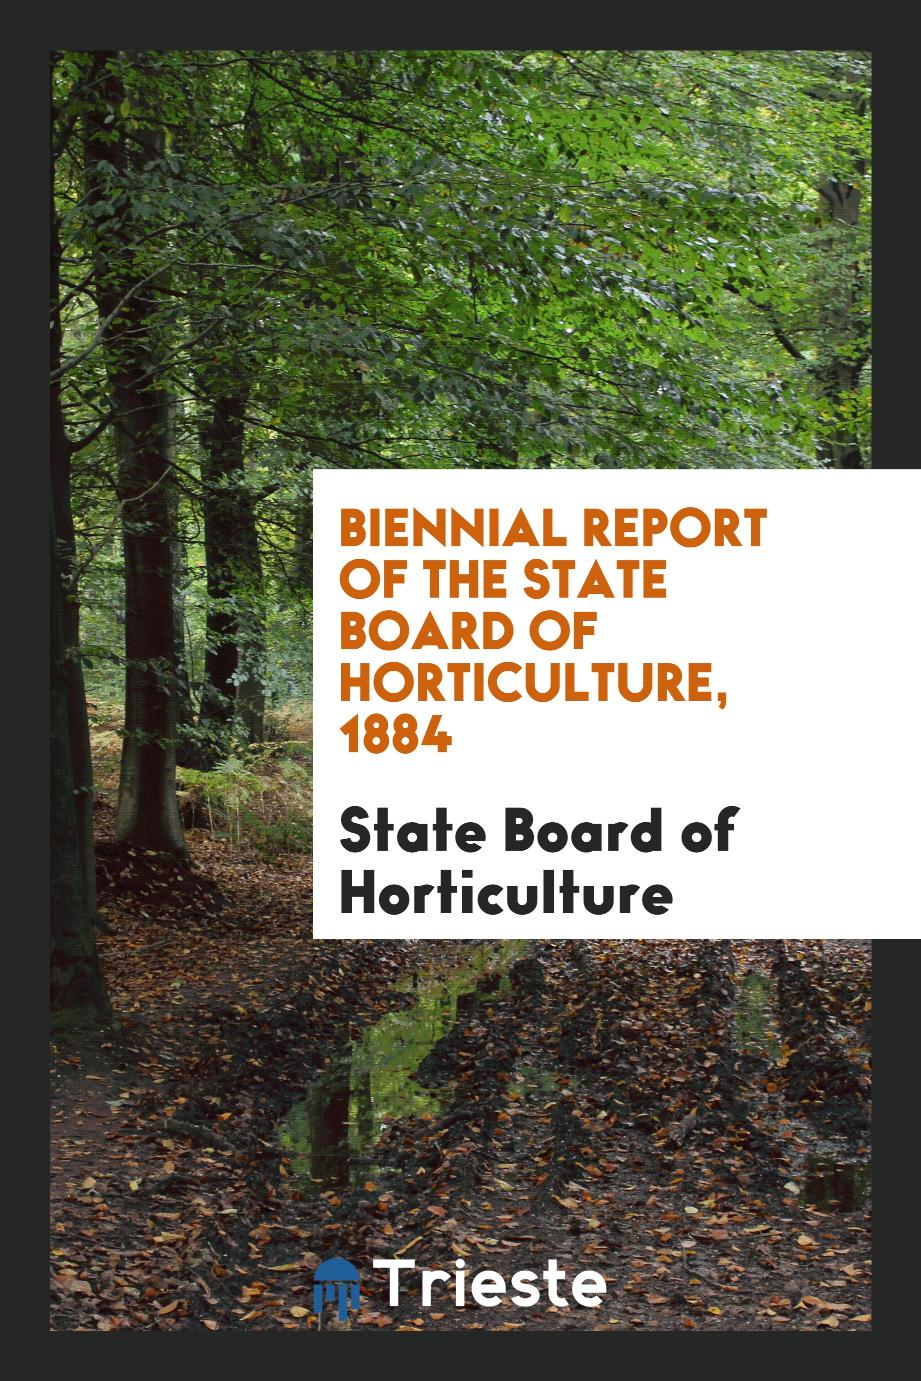 Biennial Report of the State Board of Horticulture, 1884